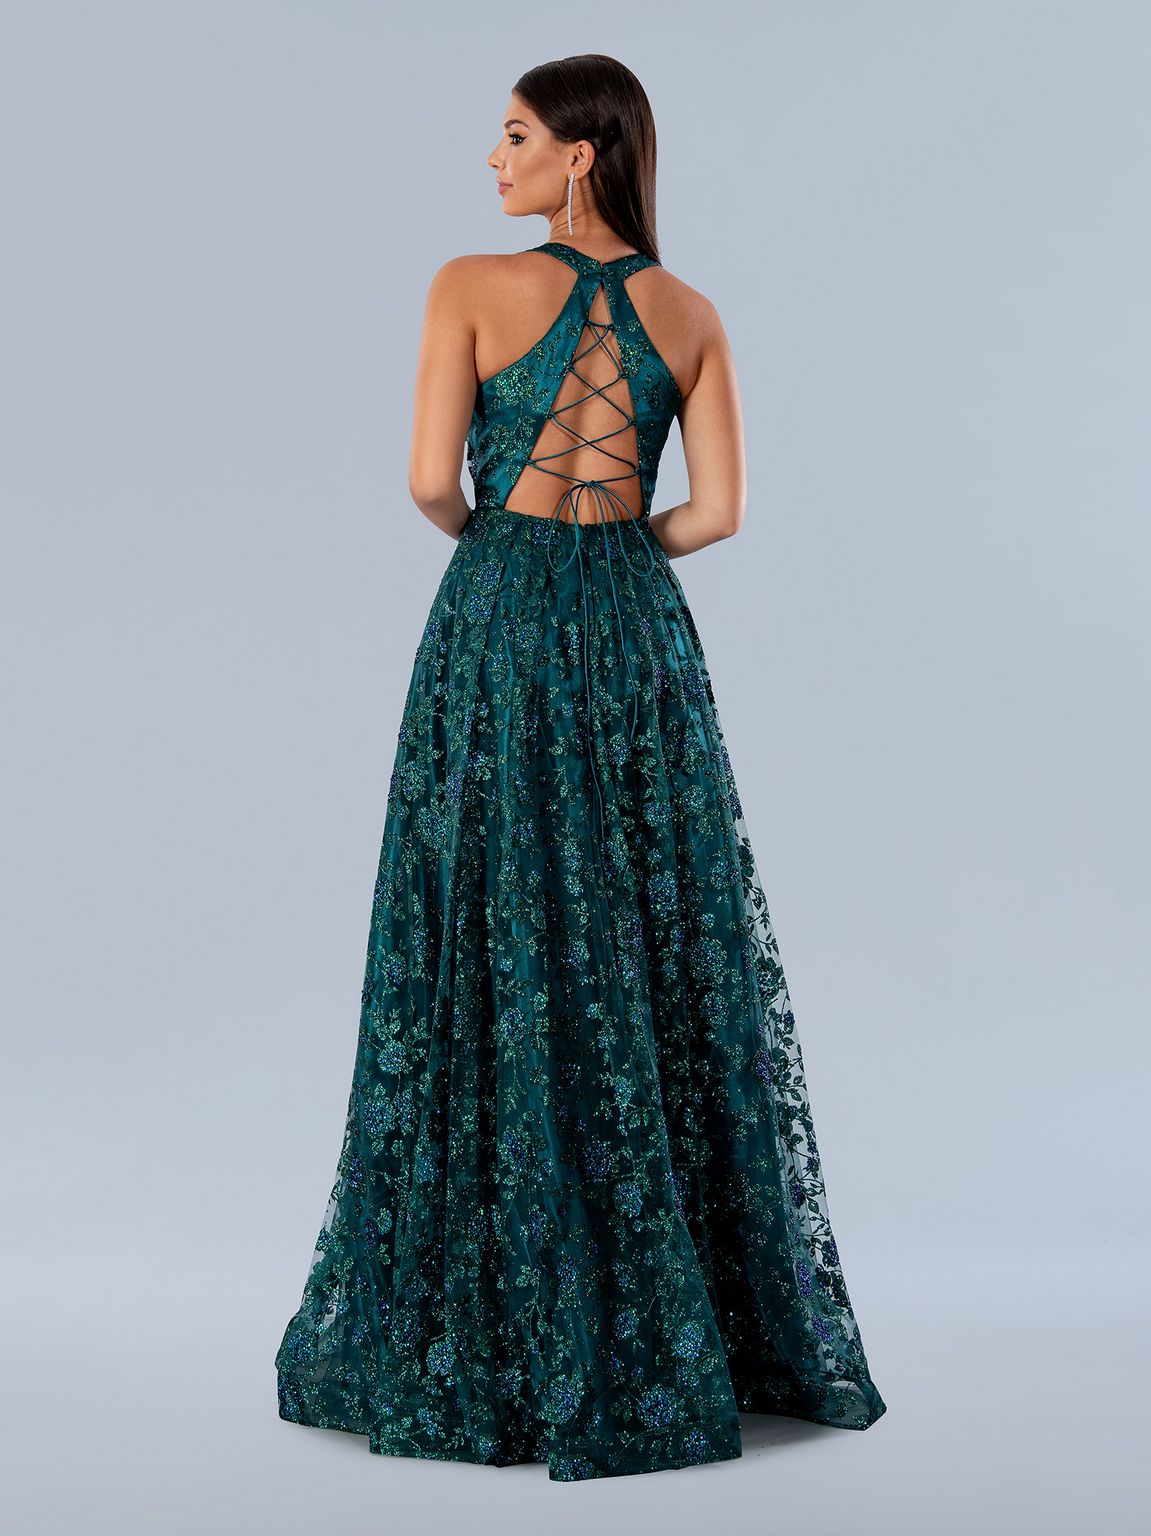 Prom Dresses Floral Sequin Long Formal Prom Dress Green